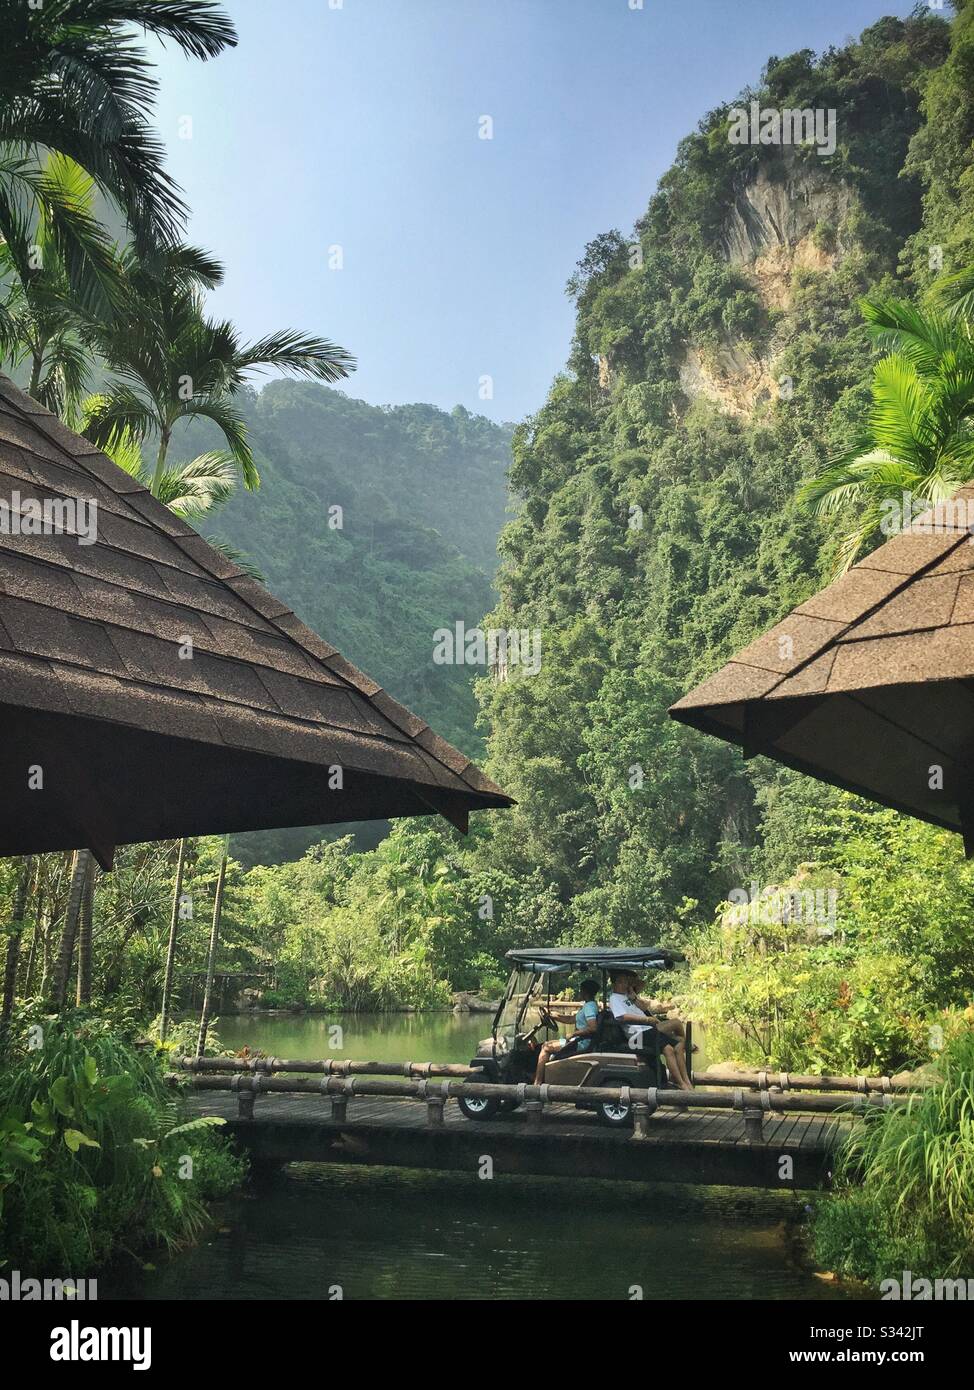 The man-made lake fed by geothermal hotsprings and the spectacular limestone karst landscape at The Banjaran Hotsprings Retreat near Ipoh, Malaysia Stock Photo